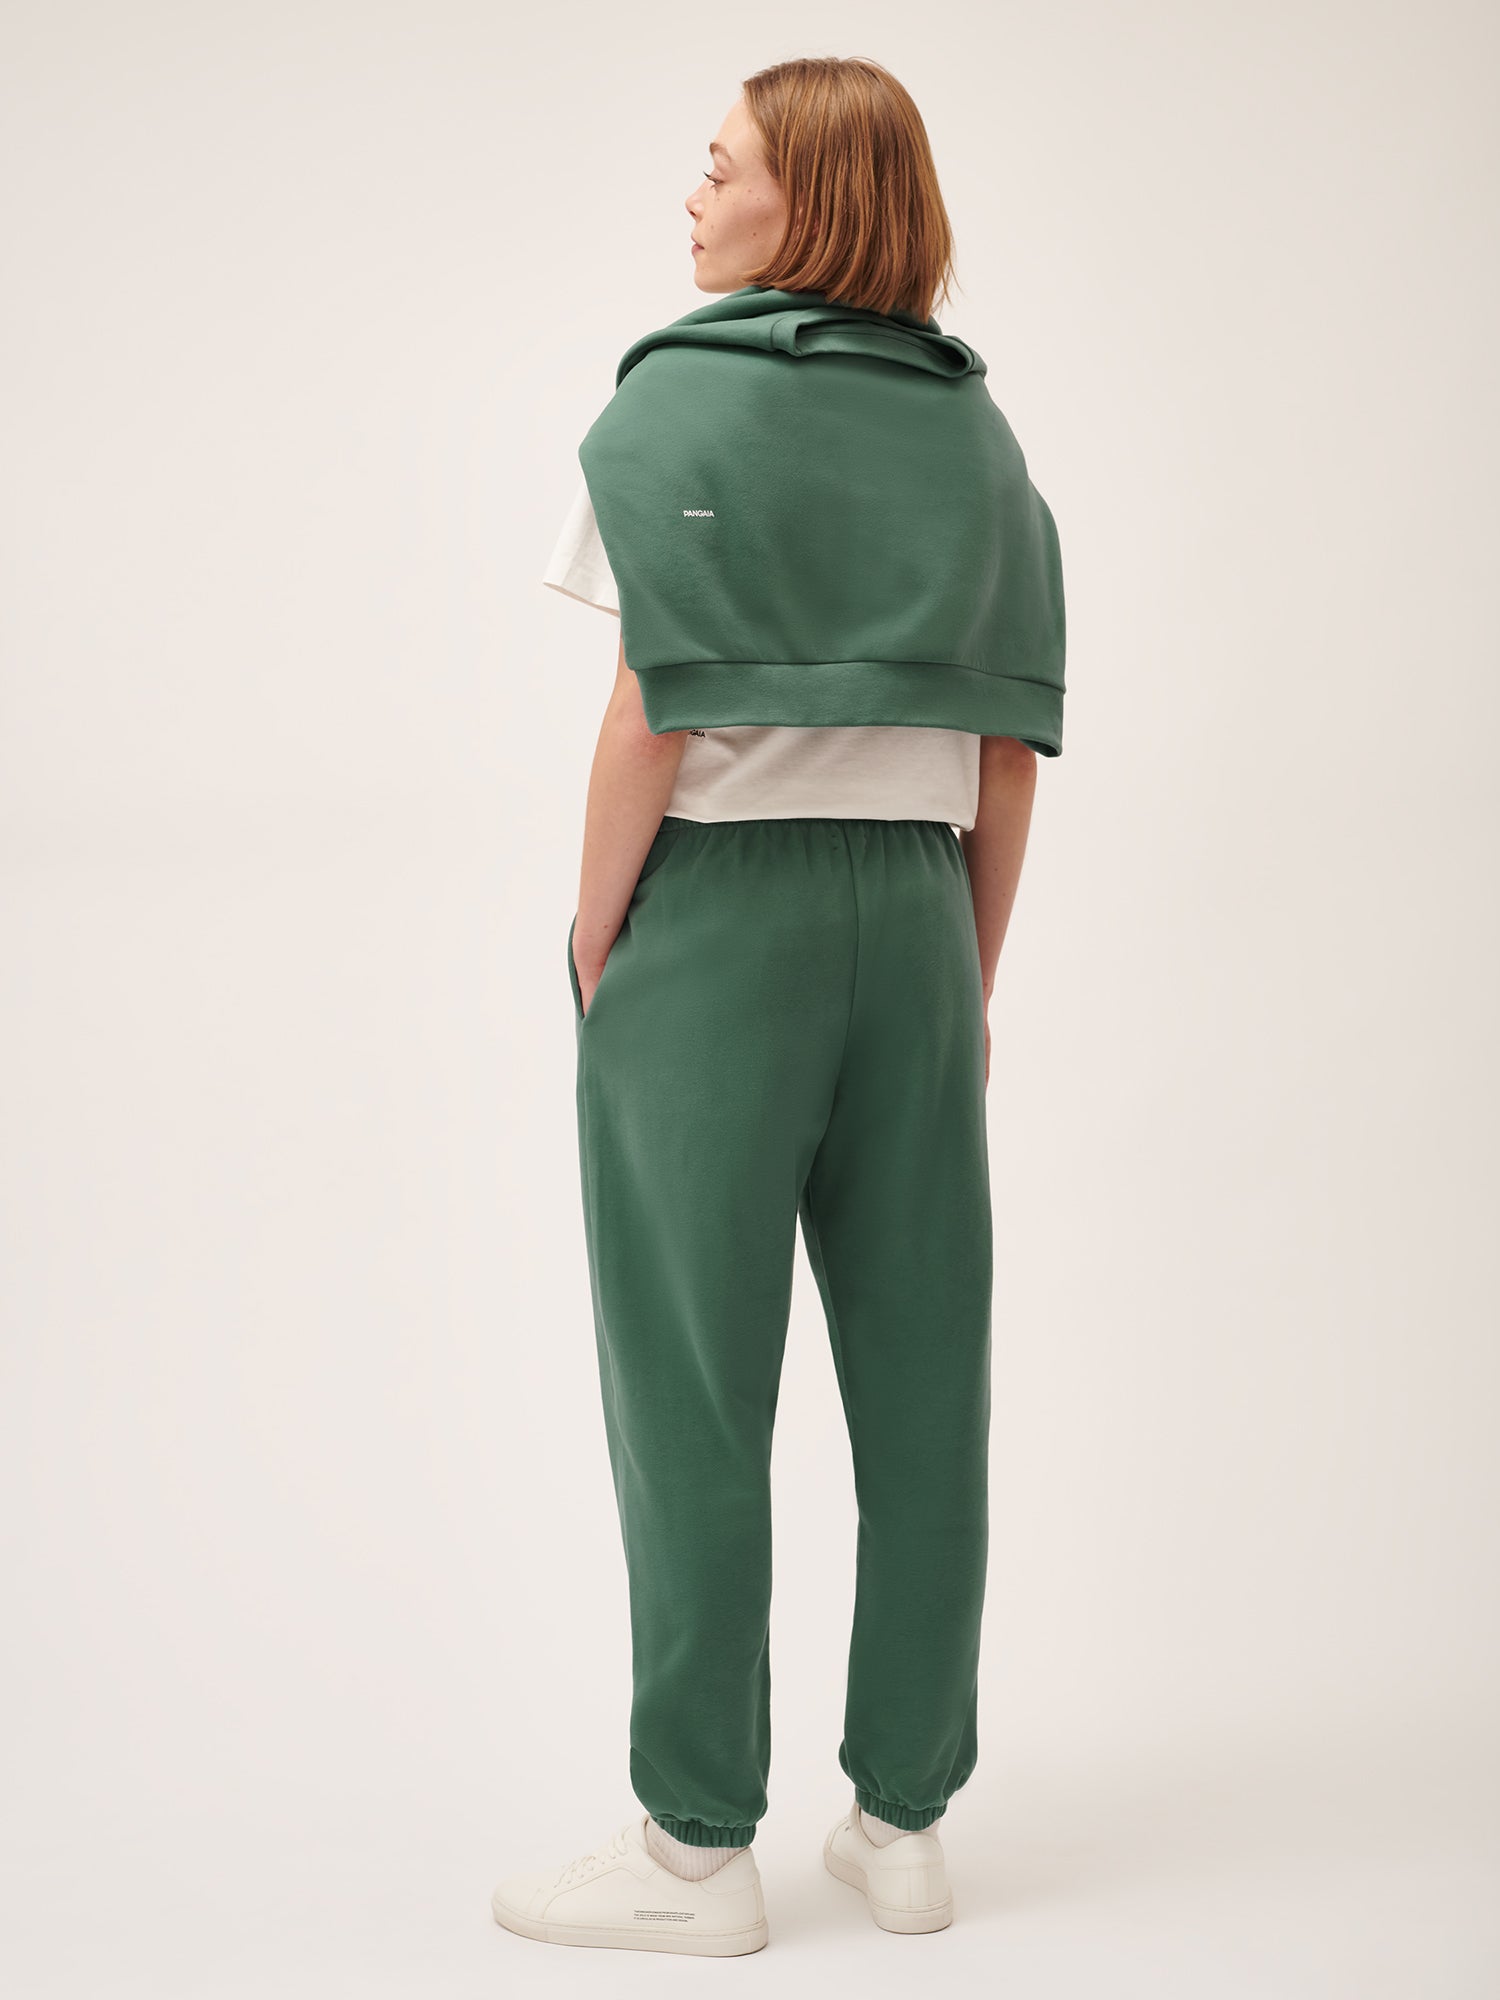 365_TrackPants_Forest_Green_female-4